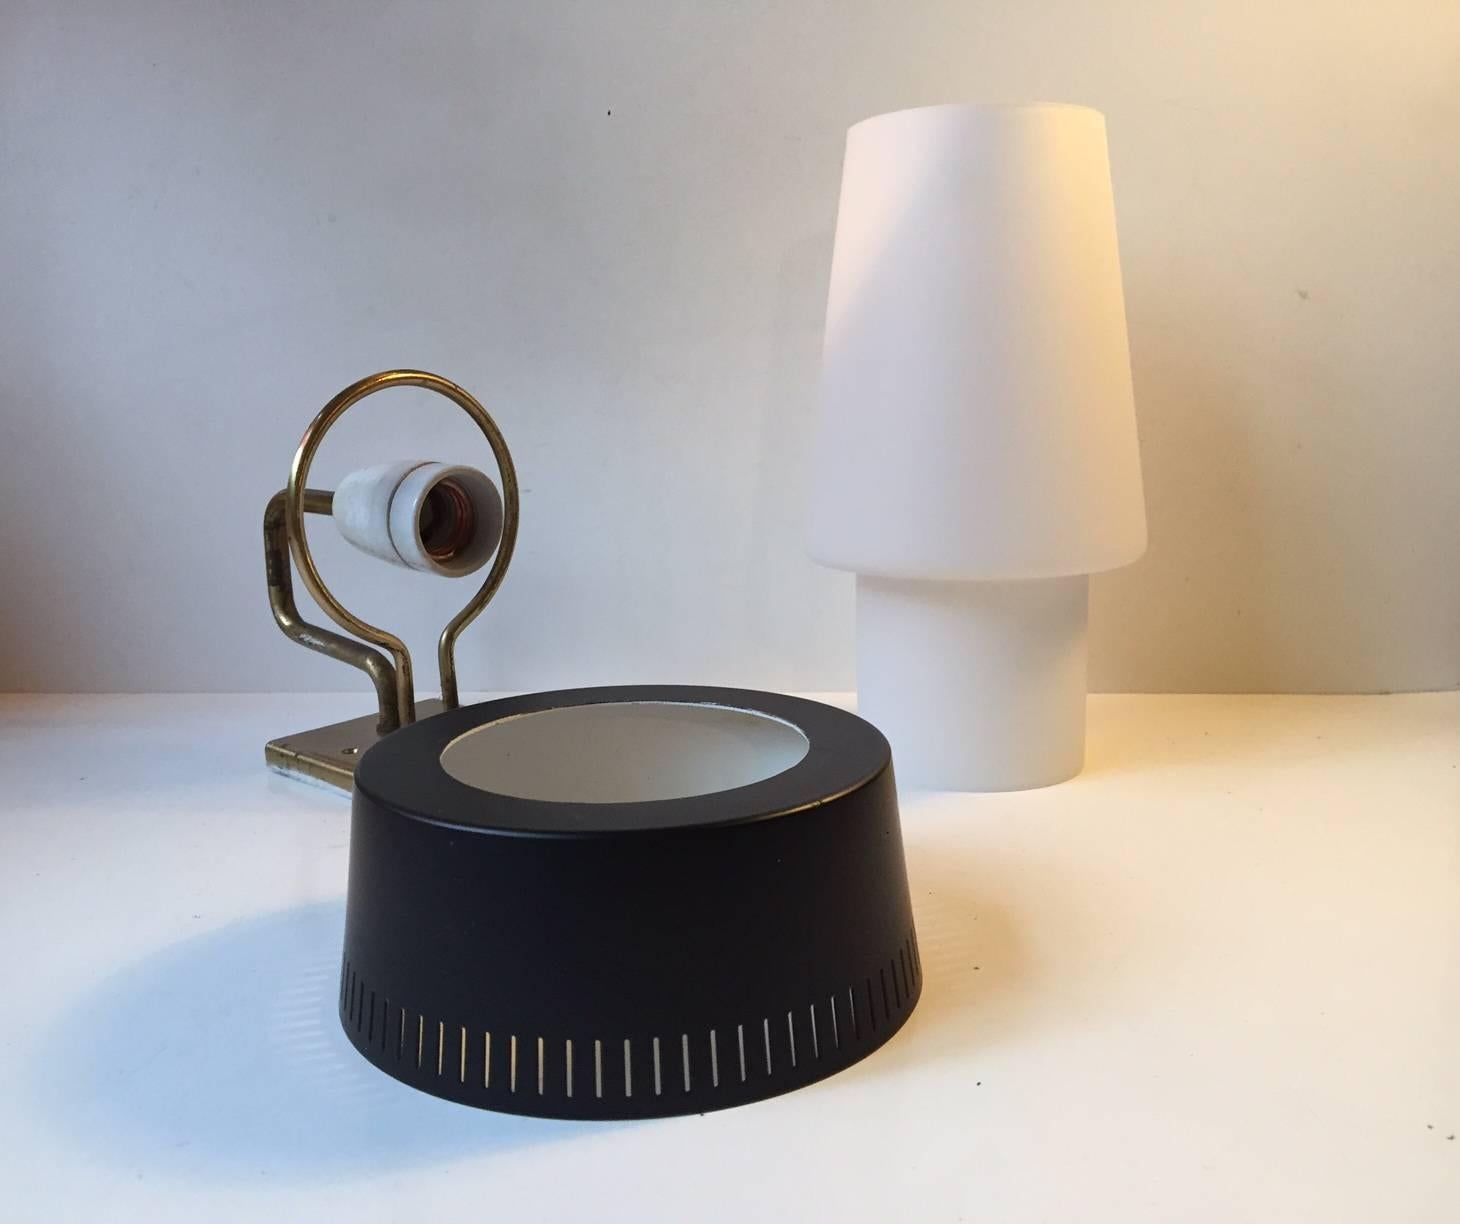 Mid-Century Modern Danish Modernist Cased Glass and Brass Wall Light by Bent Karlby for Lyfa, 1950s